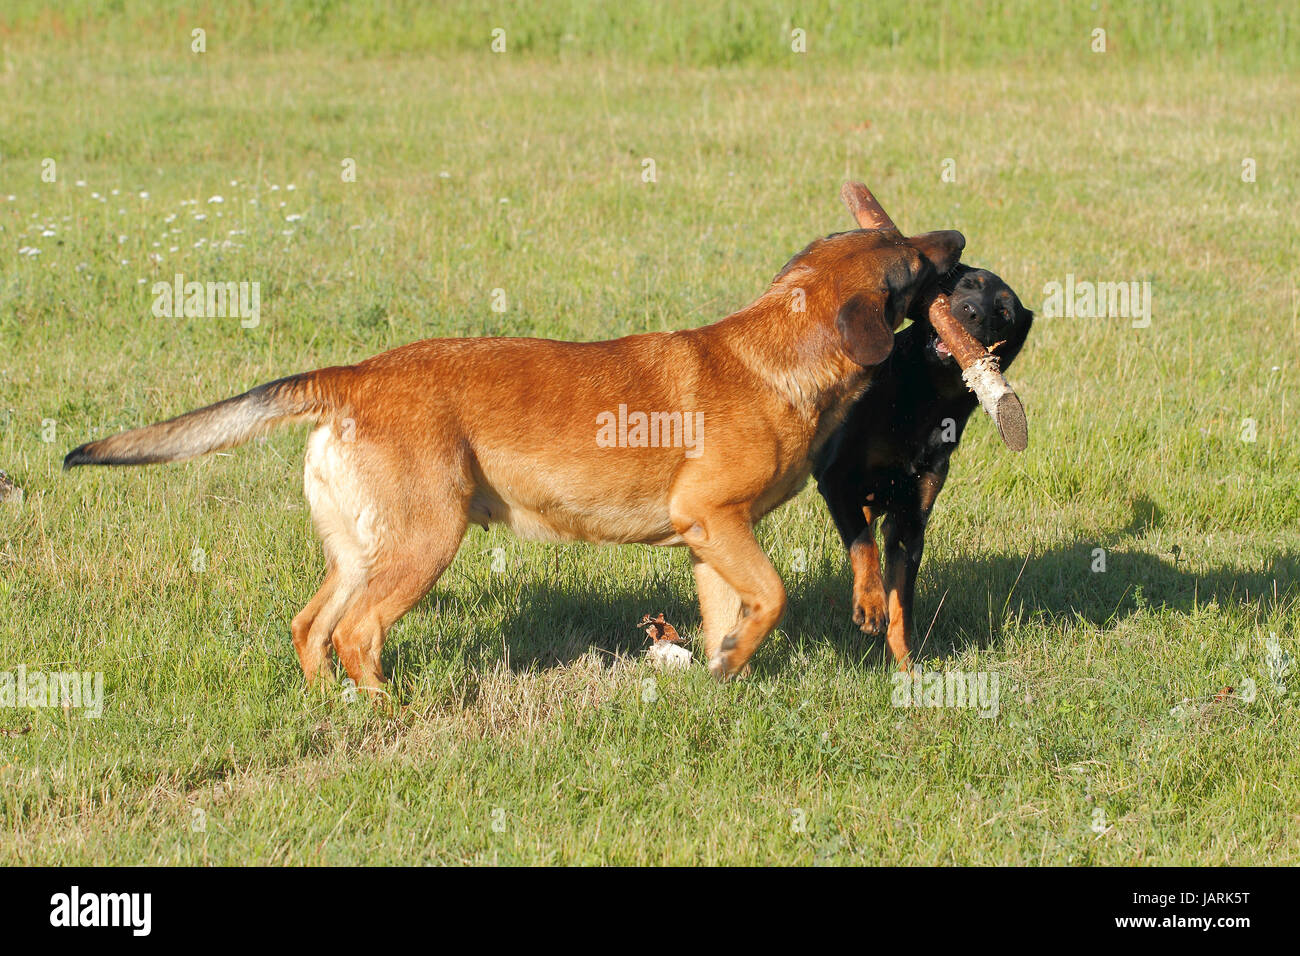 Zerren High Resolution Stock Photography and Images - Alamy